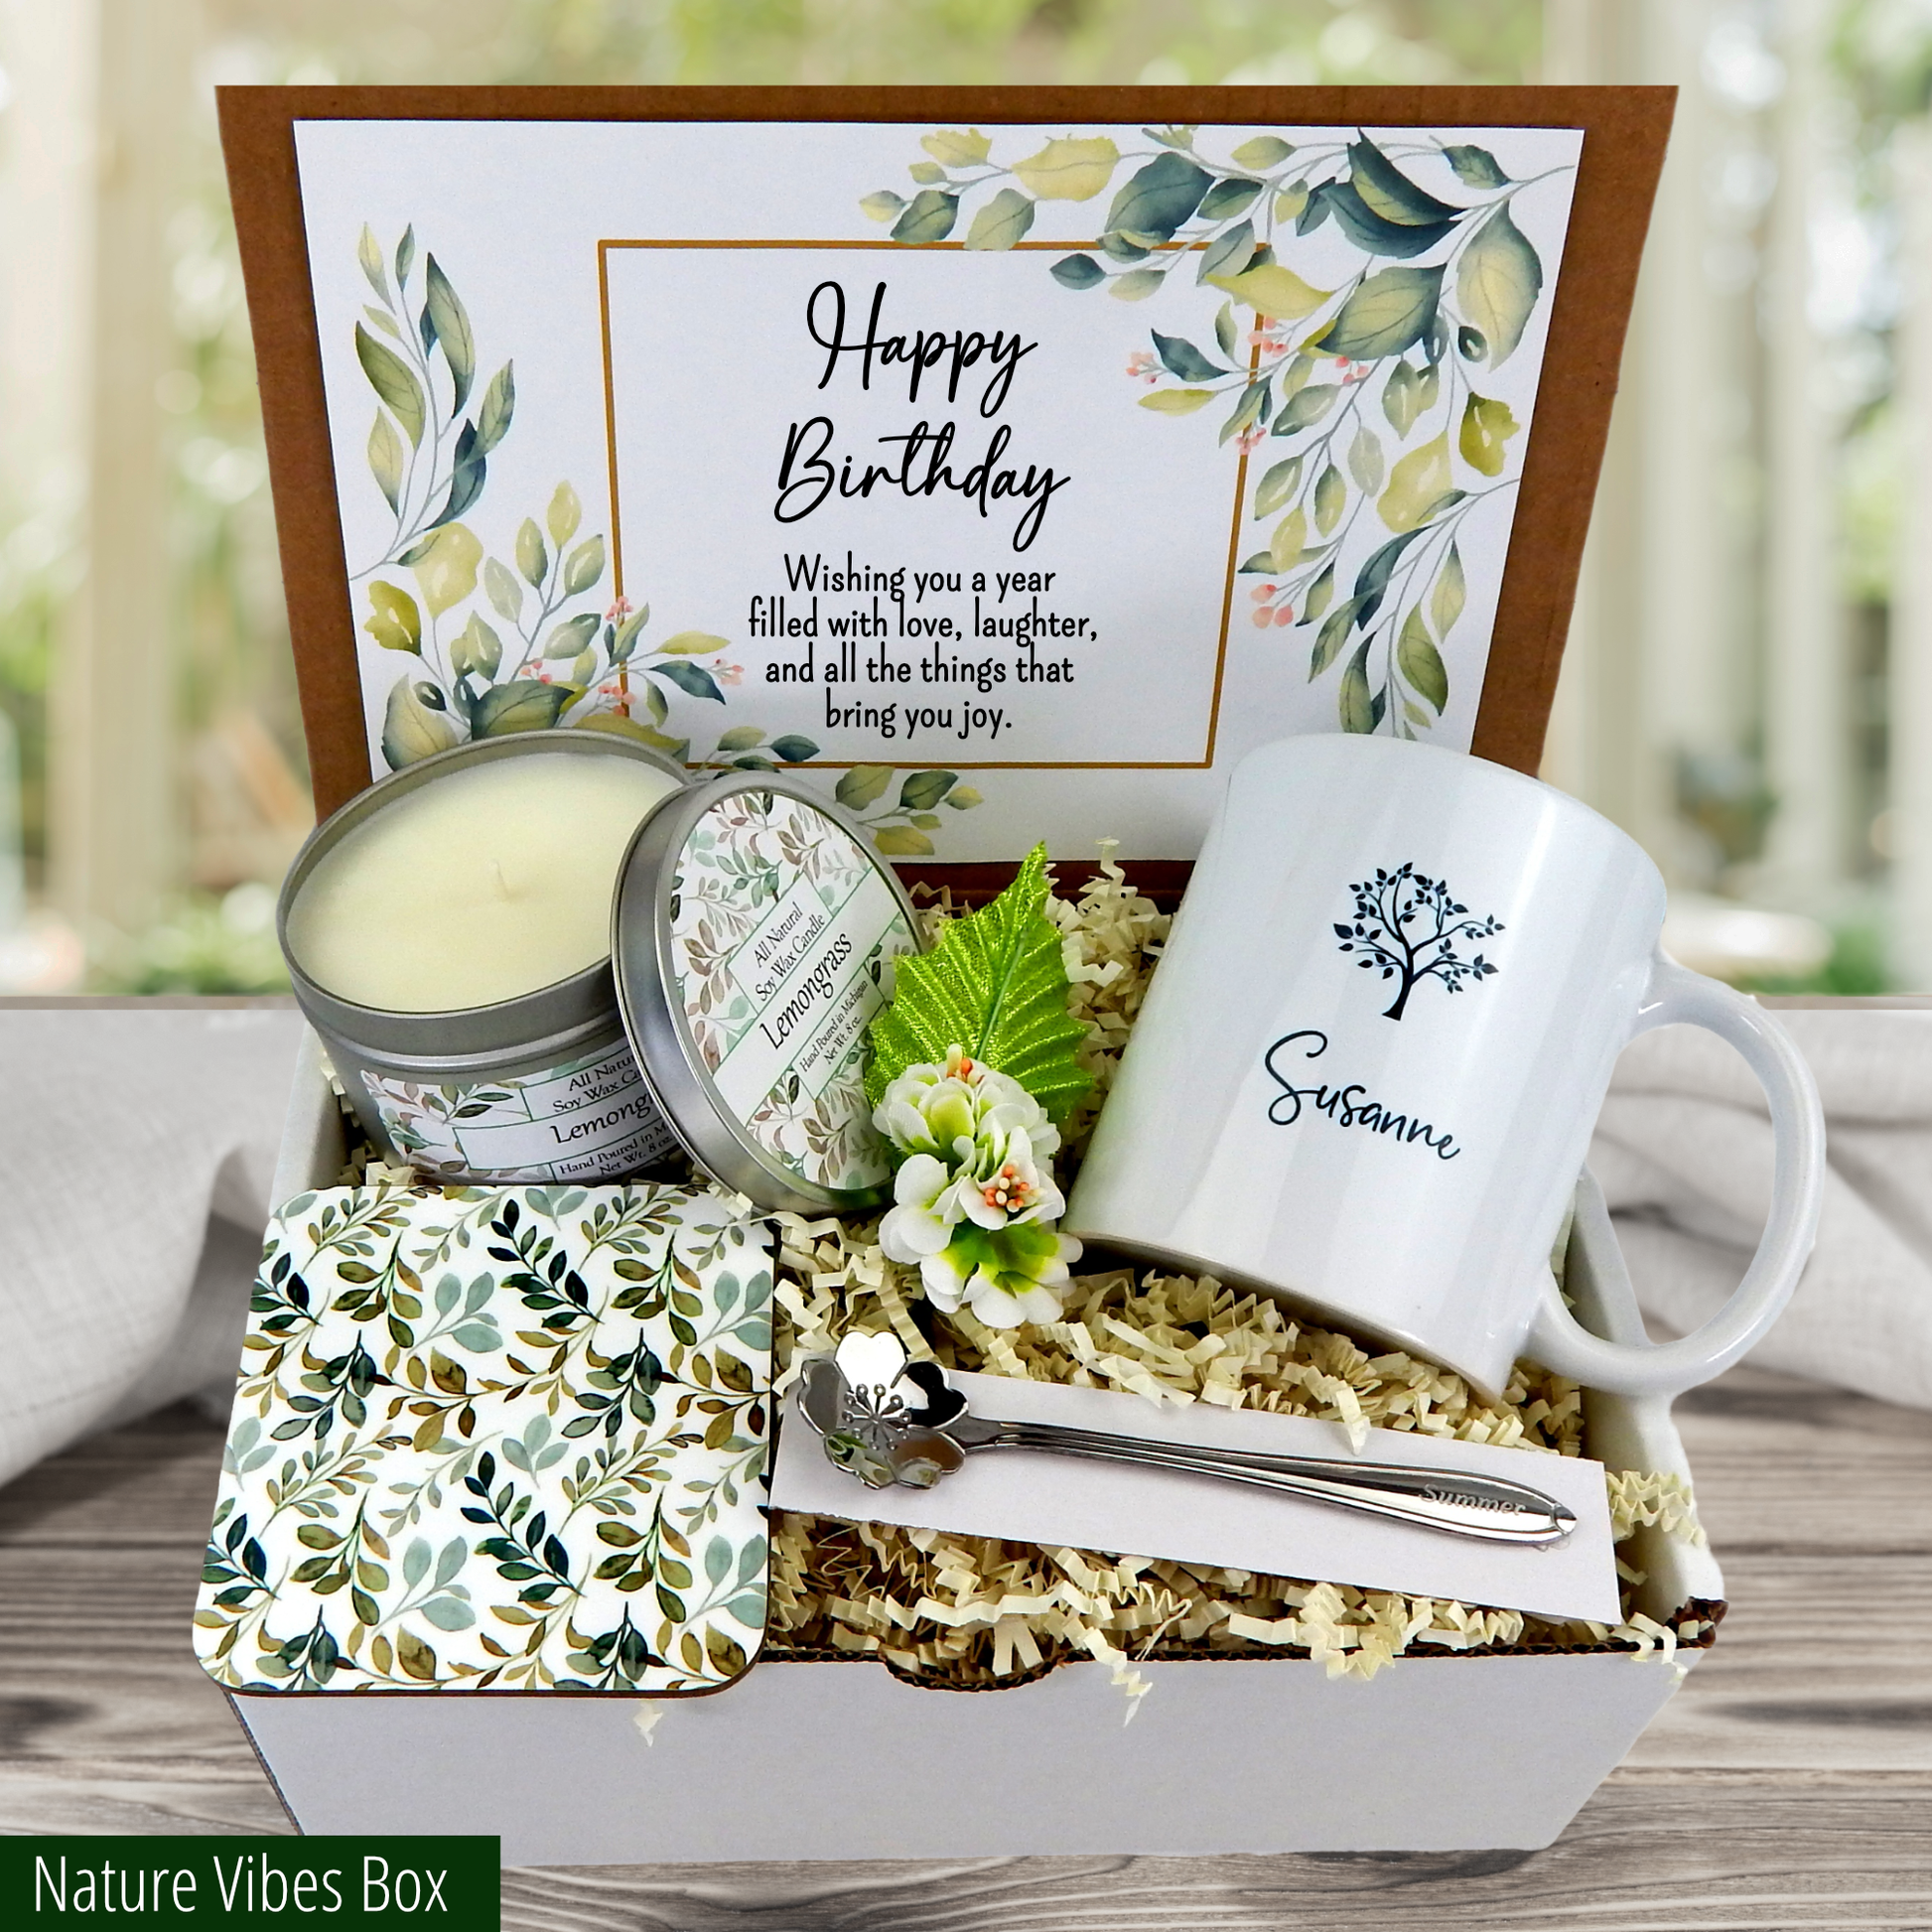 Happy Birthday Gift Box for Her, Personalized Birthday Box With